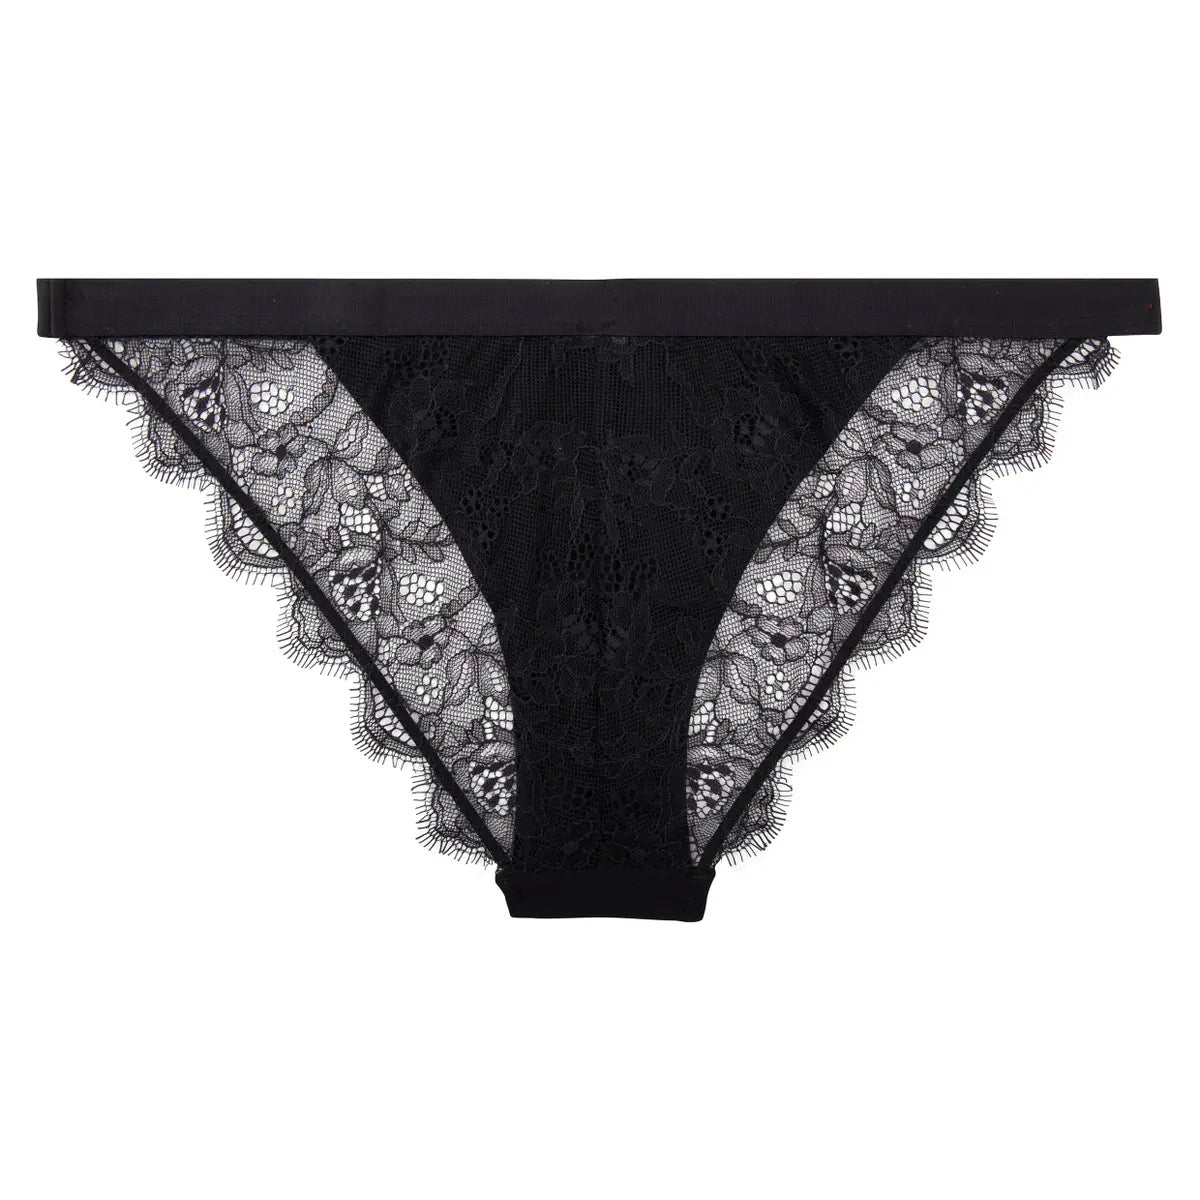 WILD ROSE Comfortable lace briefs